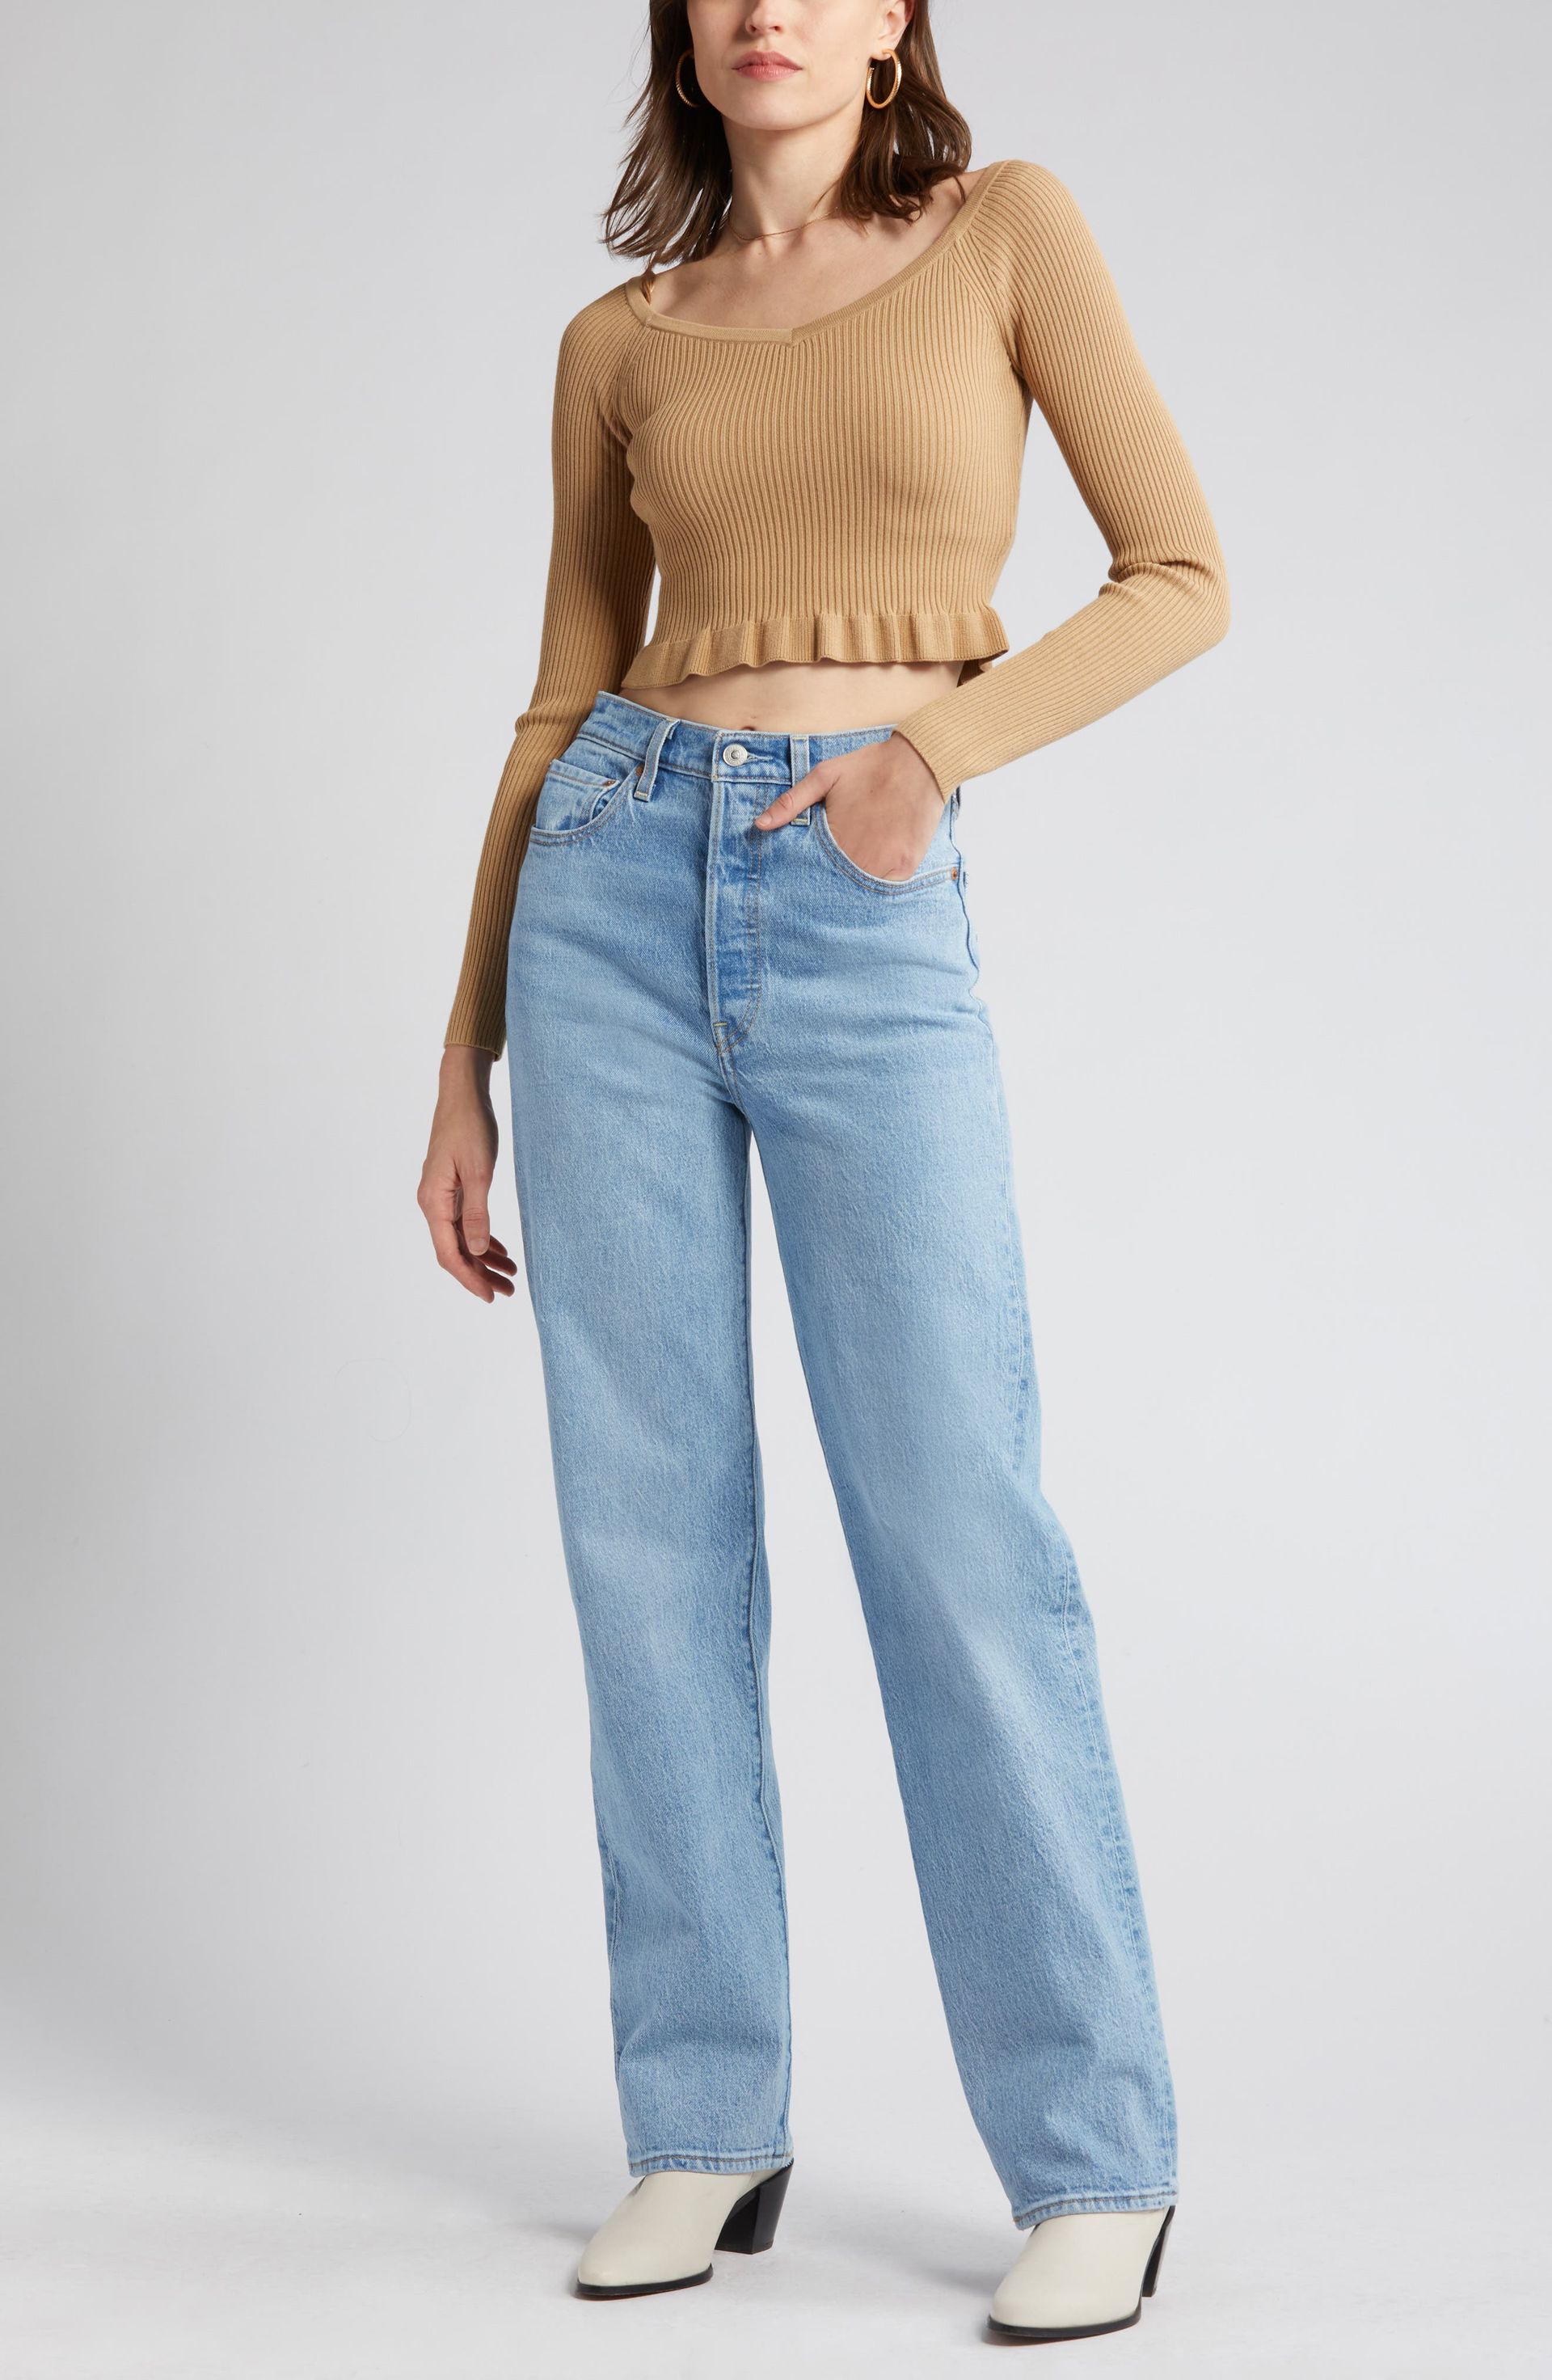 29 Nordstrom Basics You Need to See Now | Who What Wear